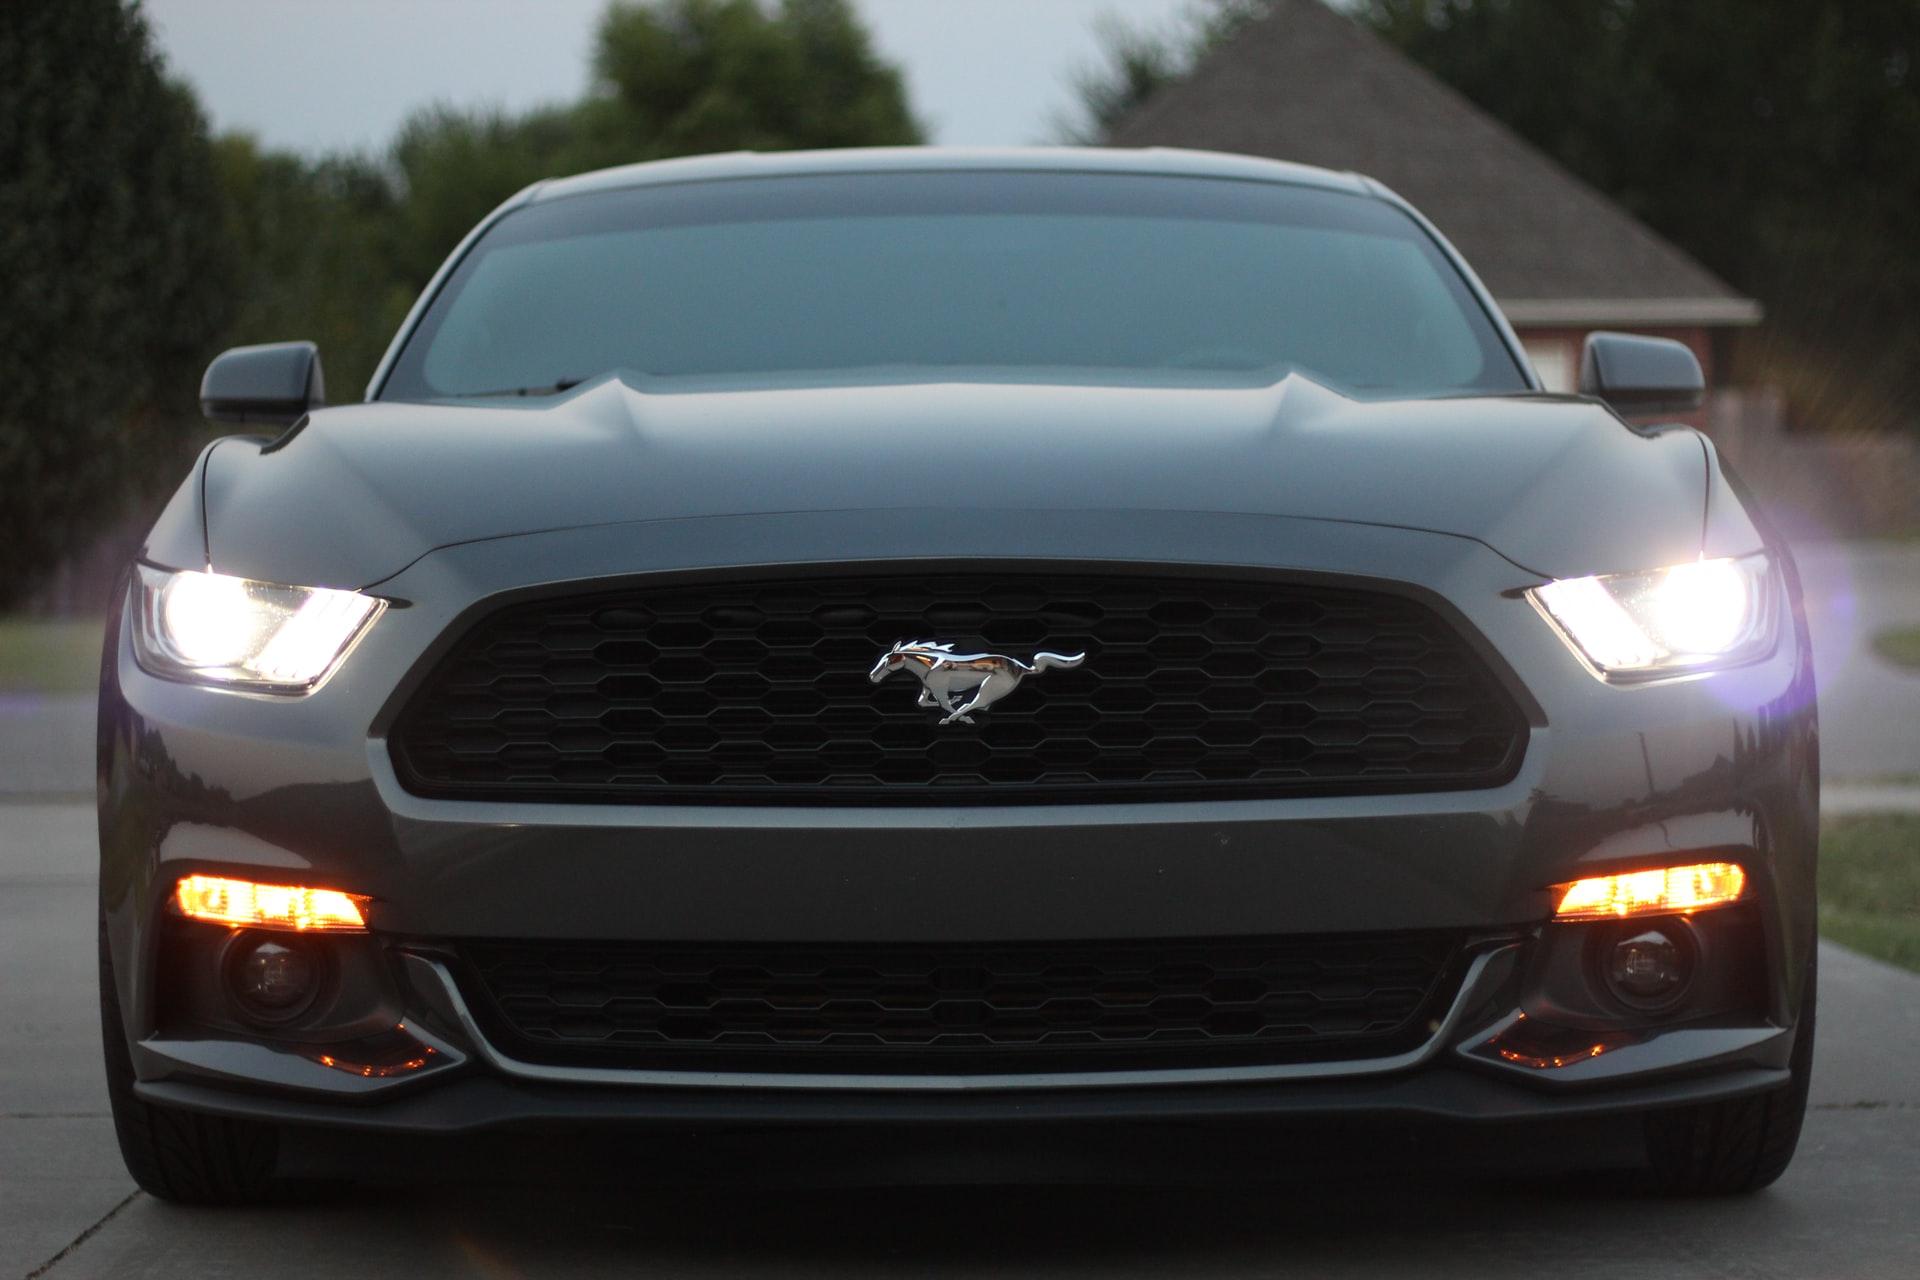 The Ford Mustang is one of the coolest cars on the market.